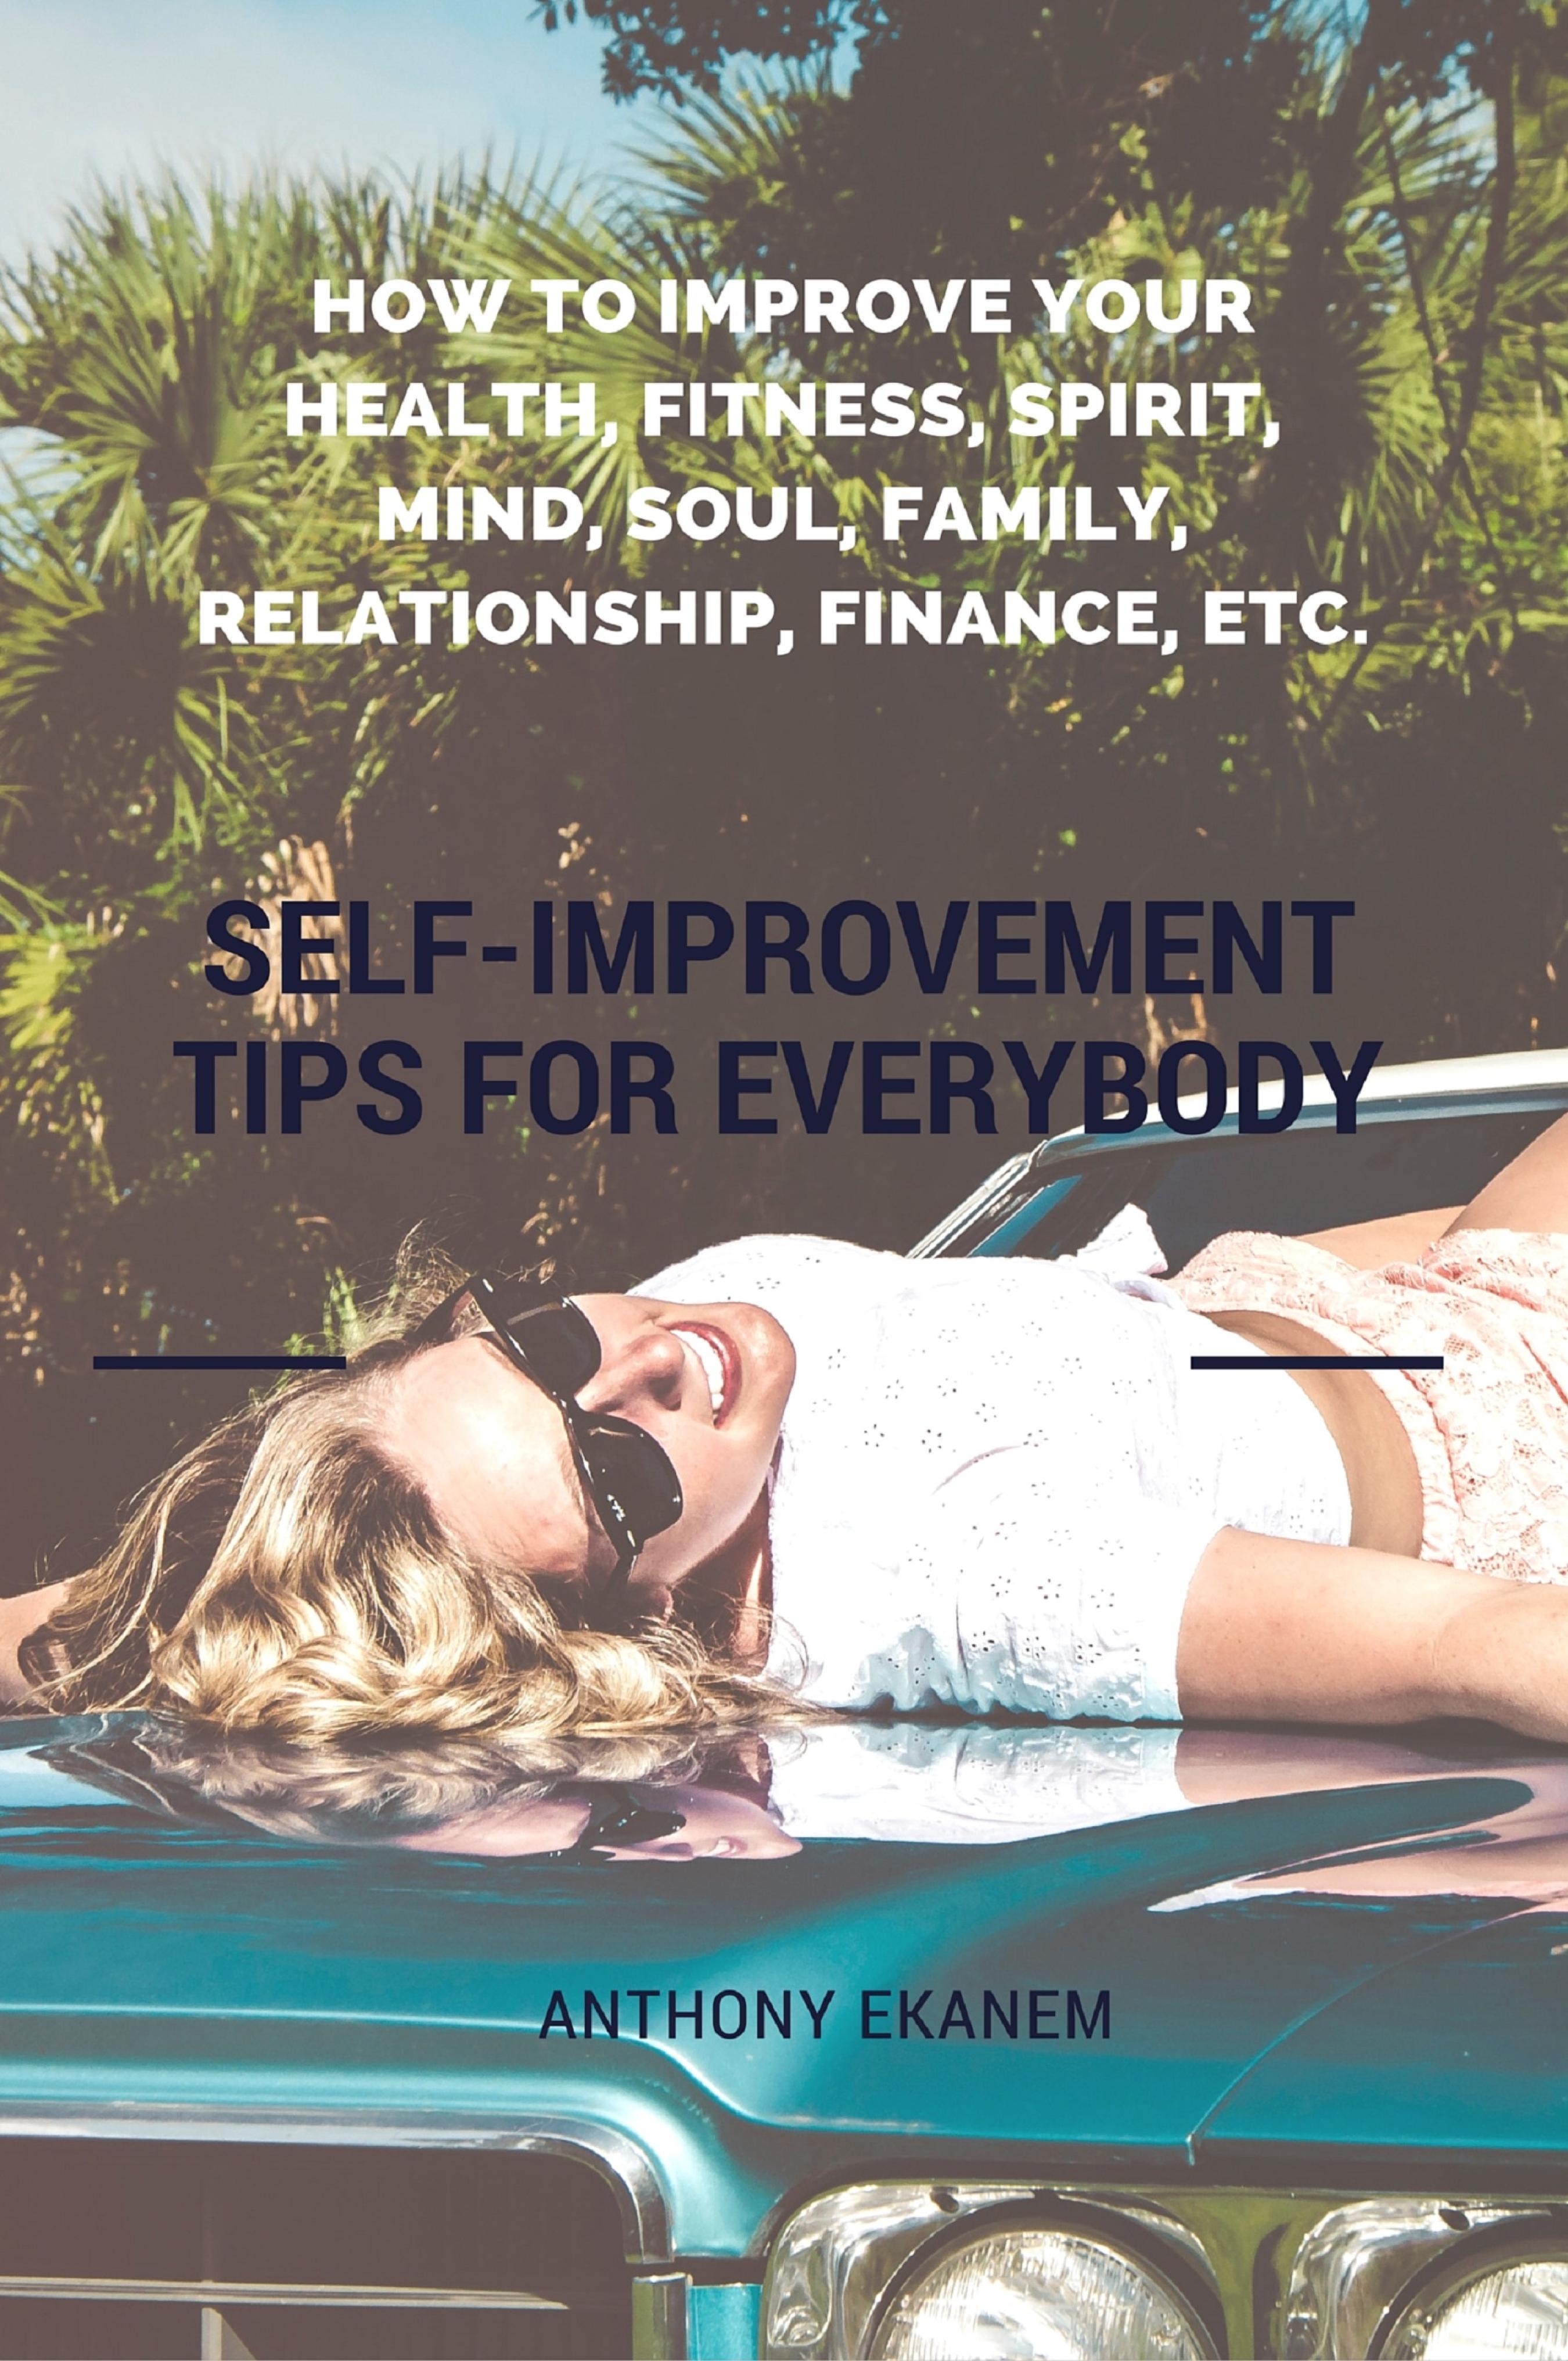 Self-Improvement Tips for Everybody